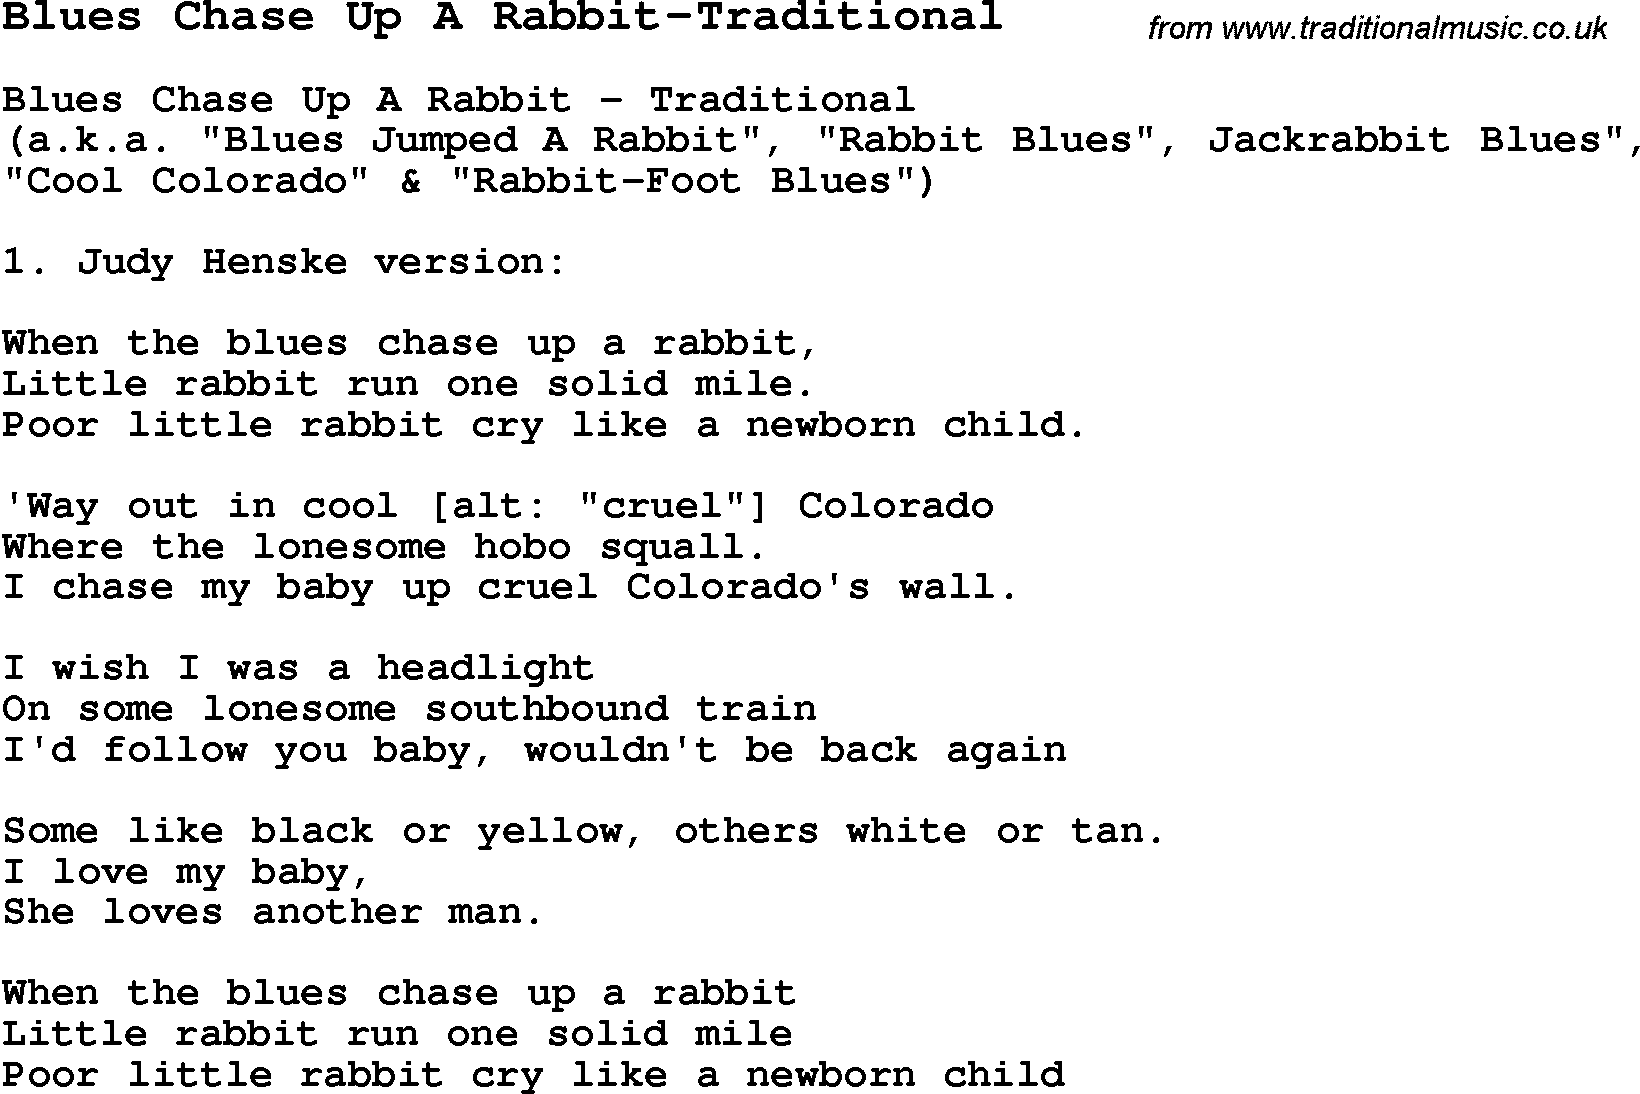 Blues Guitar Song, lyrics, chords, tablature, playing hints for Blues Chase Up A Rabbit-Traditional